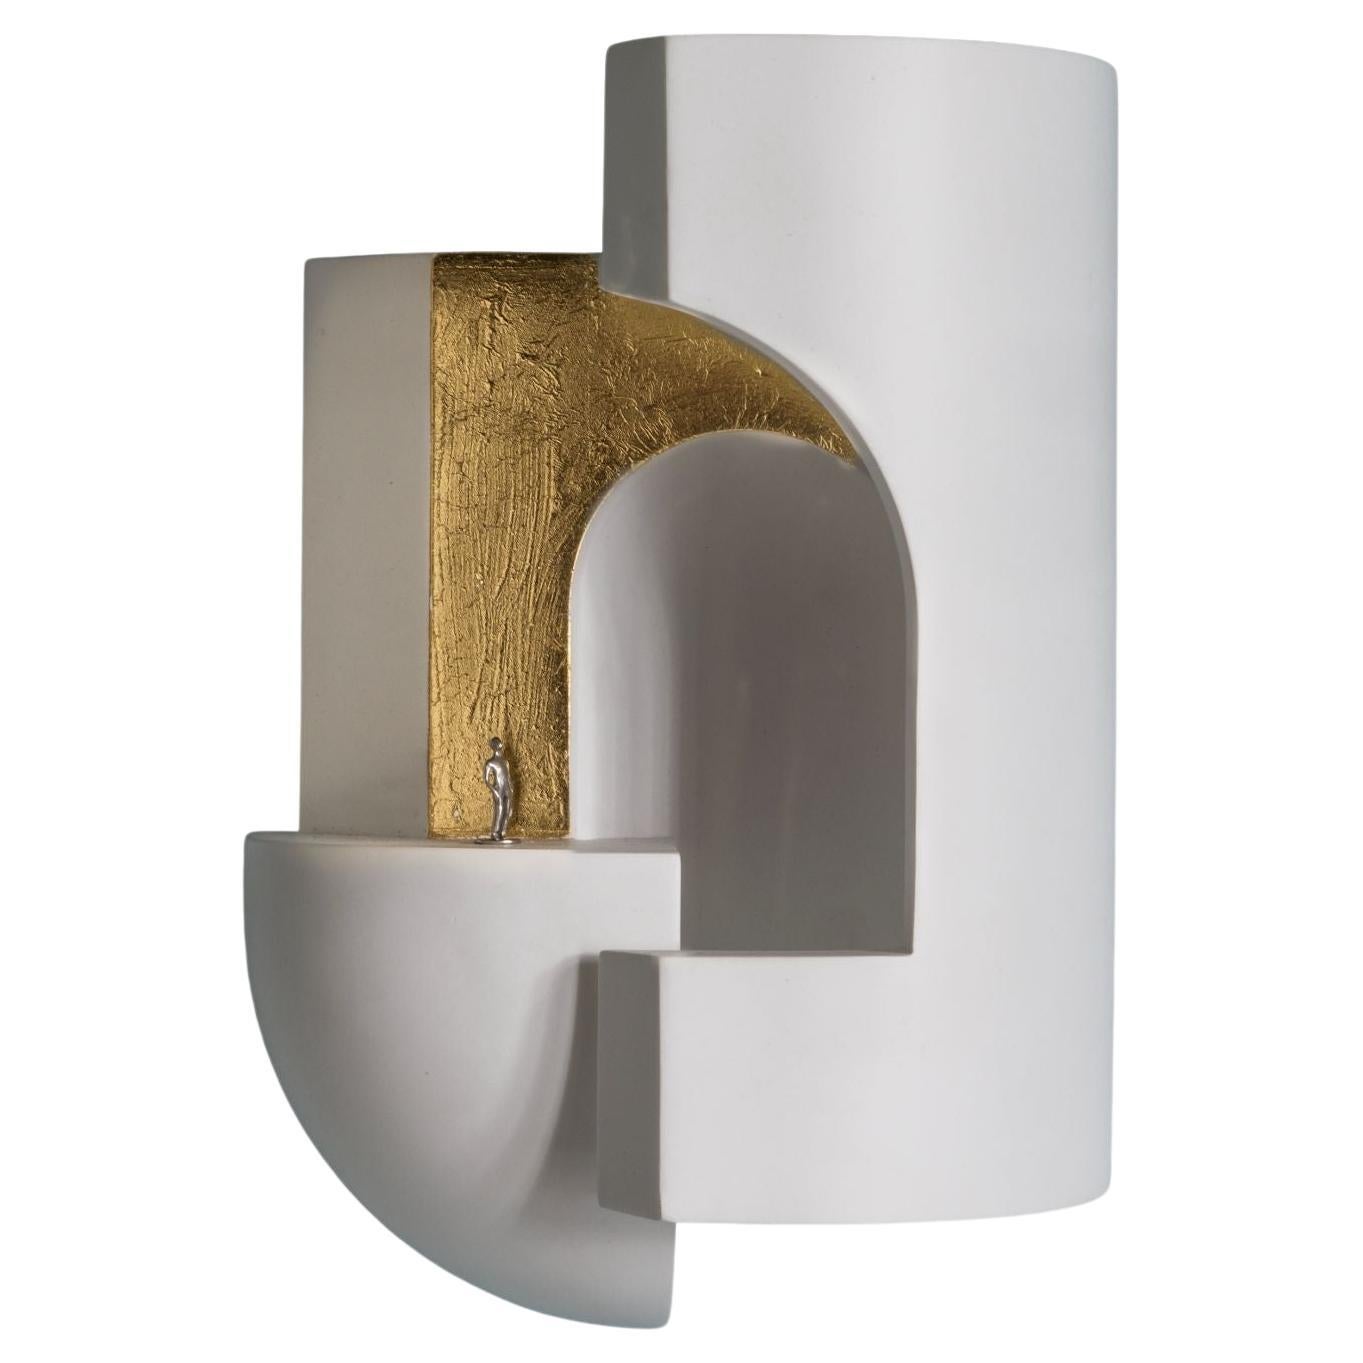 DCW Editions Soul Story 2 Wall Lamp in White and Gold Leaf by Charles Kalpakian